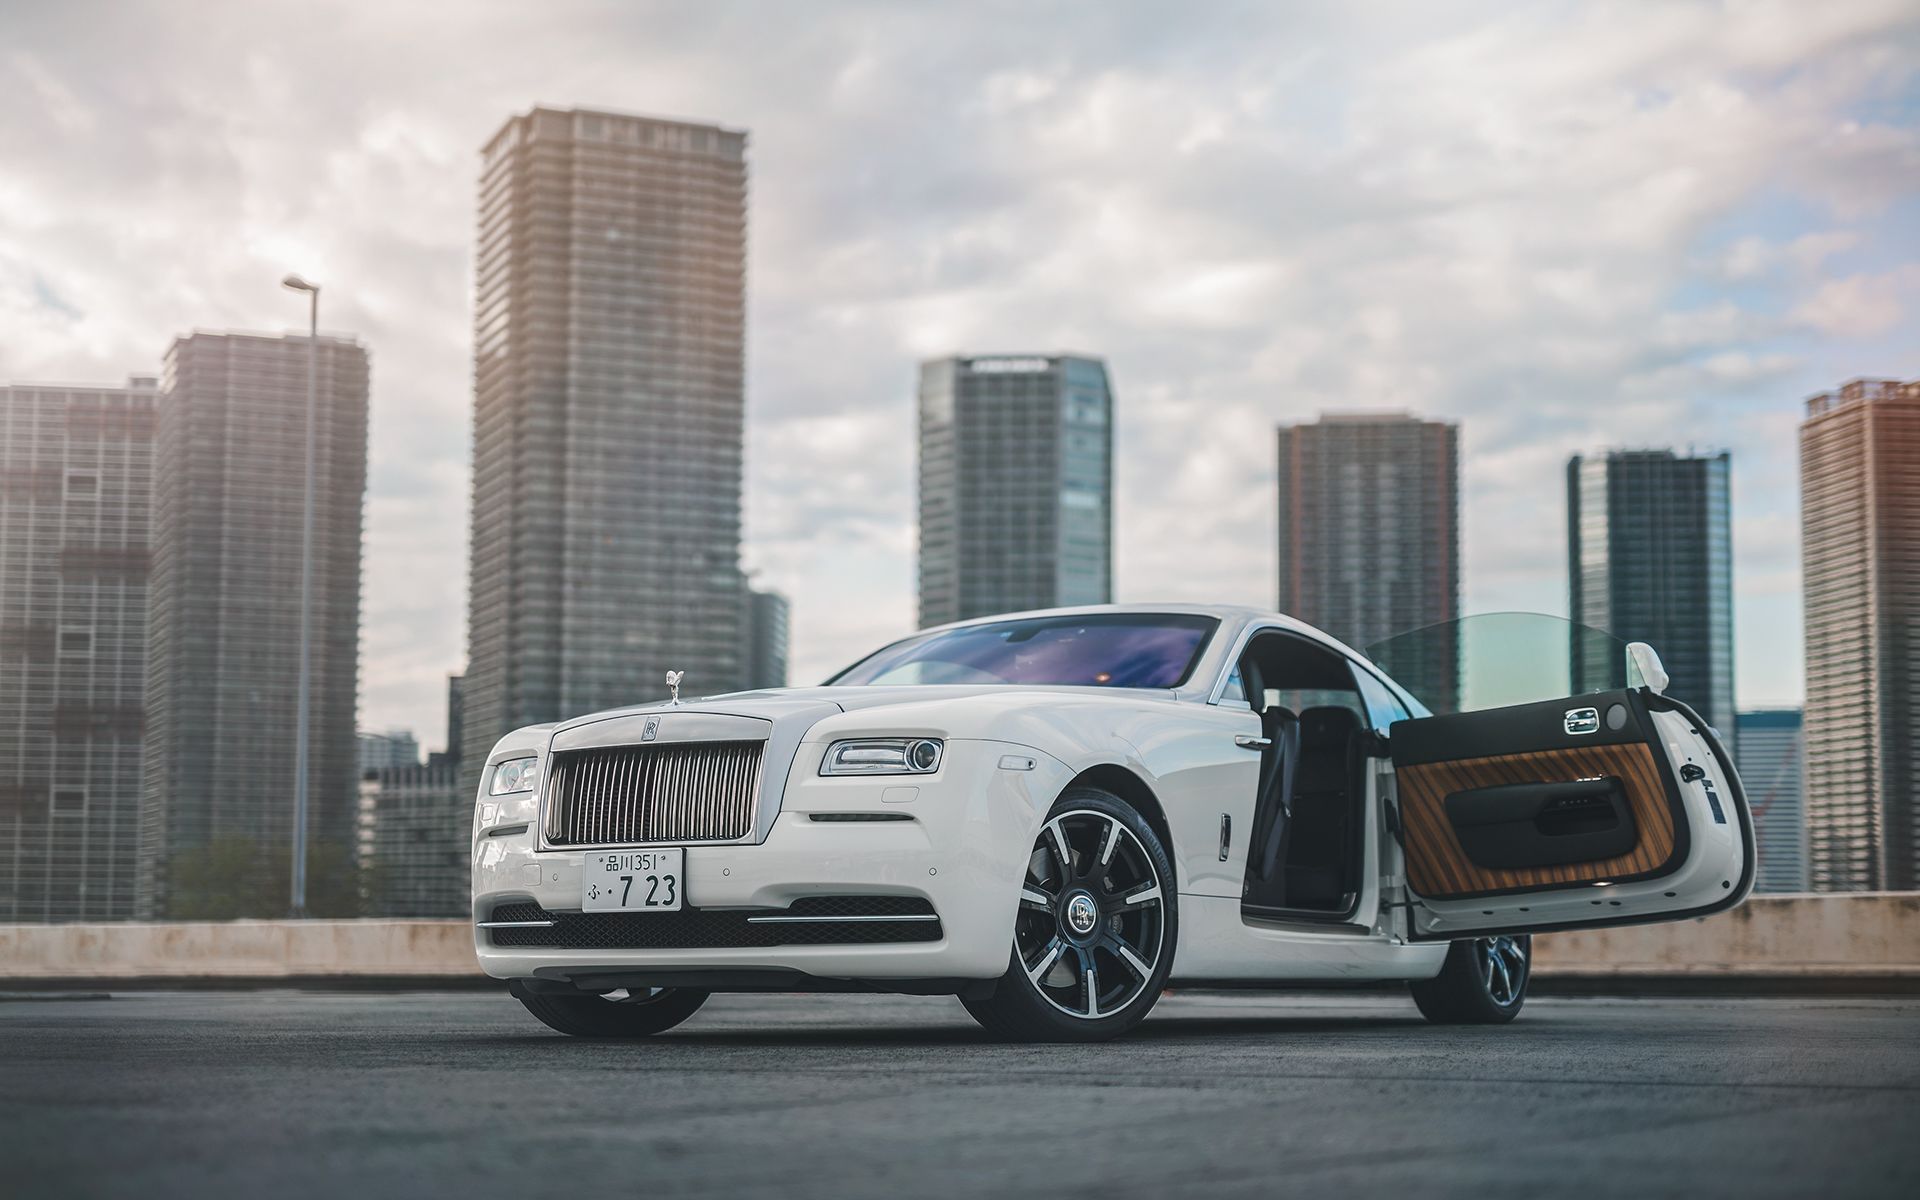 New RollsRoyce Phantom The most technologically advanced Rolls ever is  revealed in London